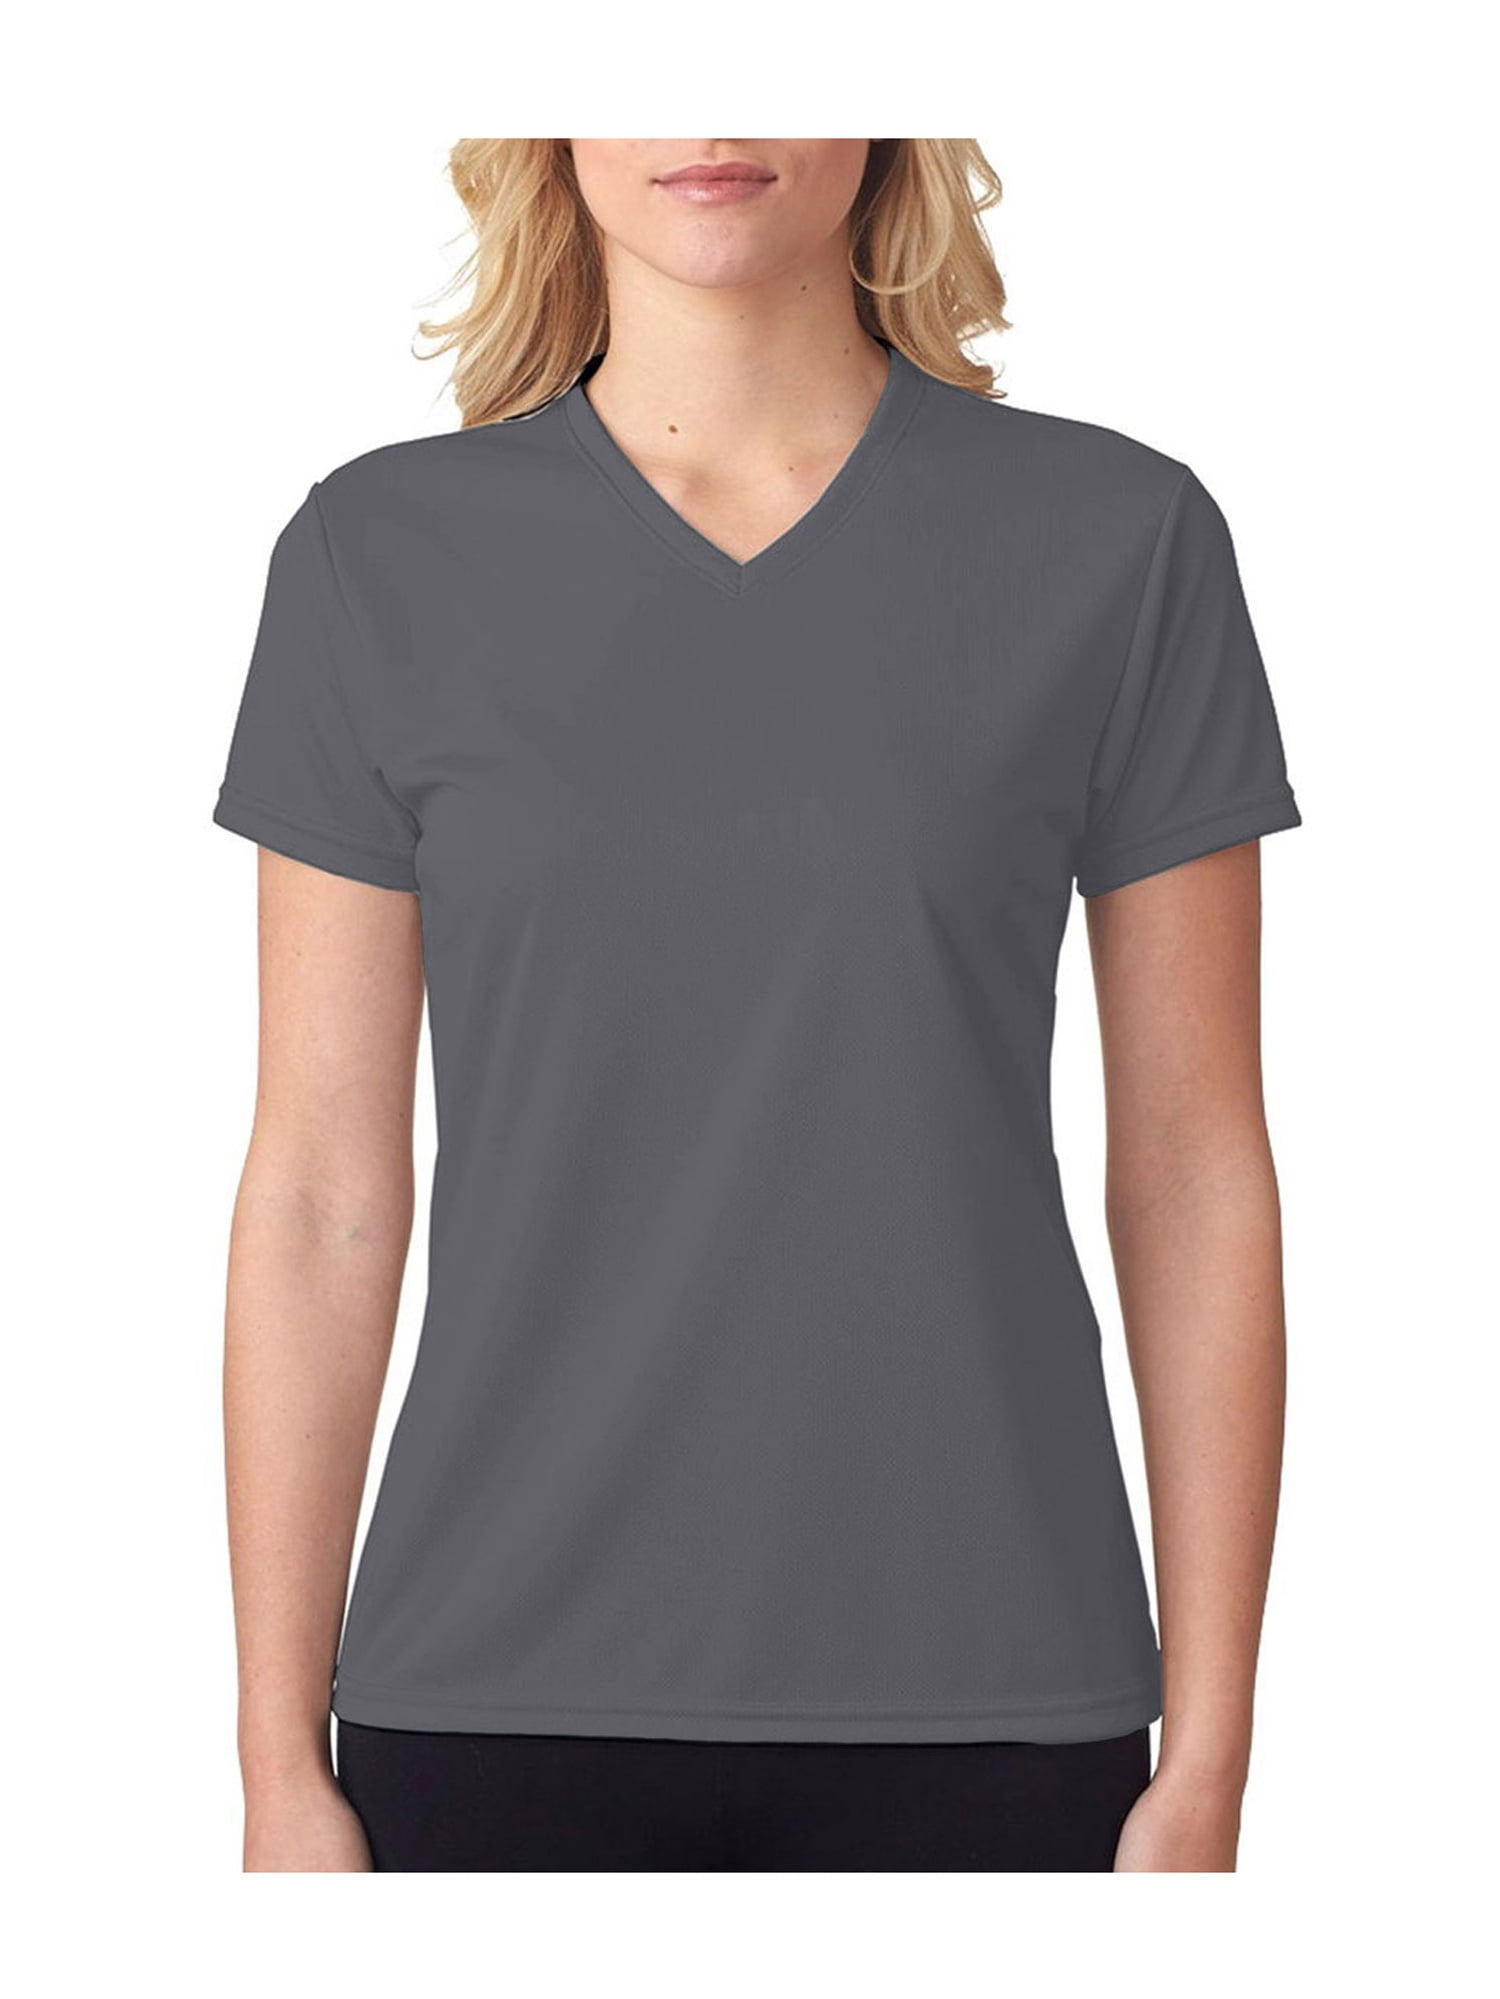 Black/Graphite/White Ladies Adult Small 3-Color Wicking/Spandex V-Neck Jersey Athletic Sports Shirt